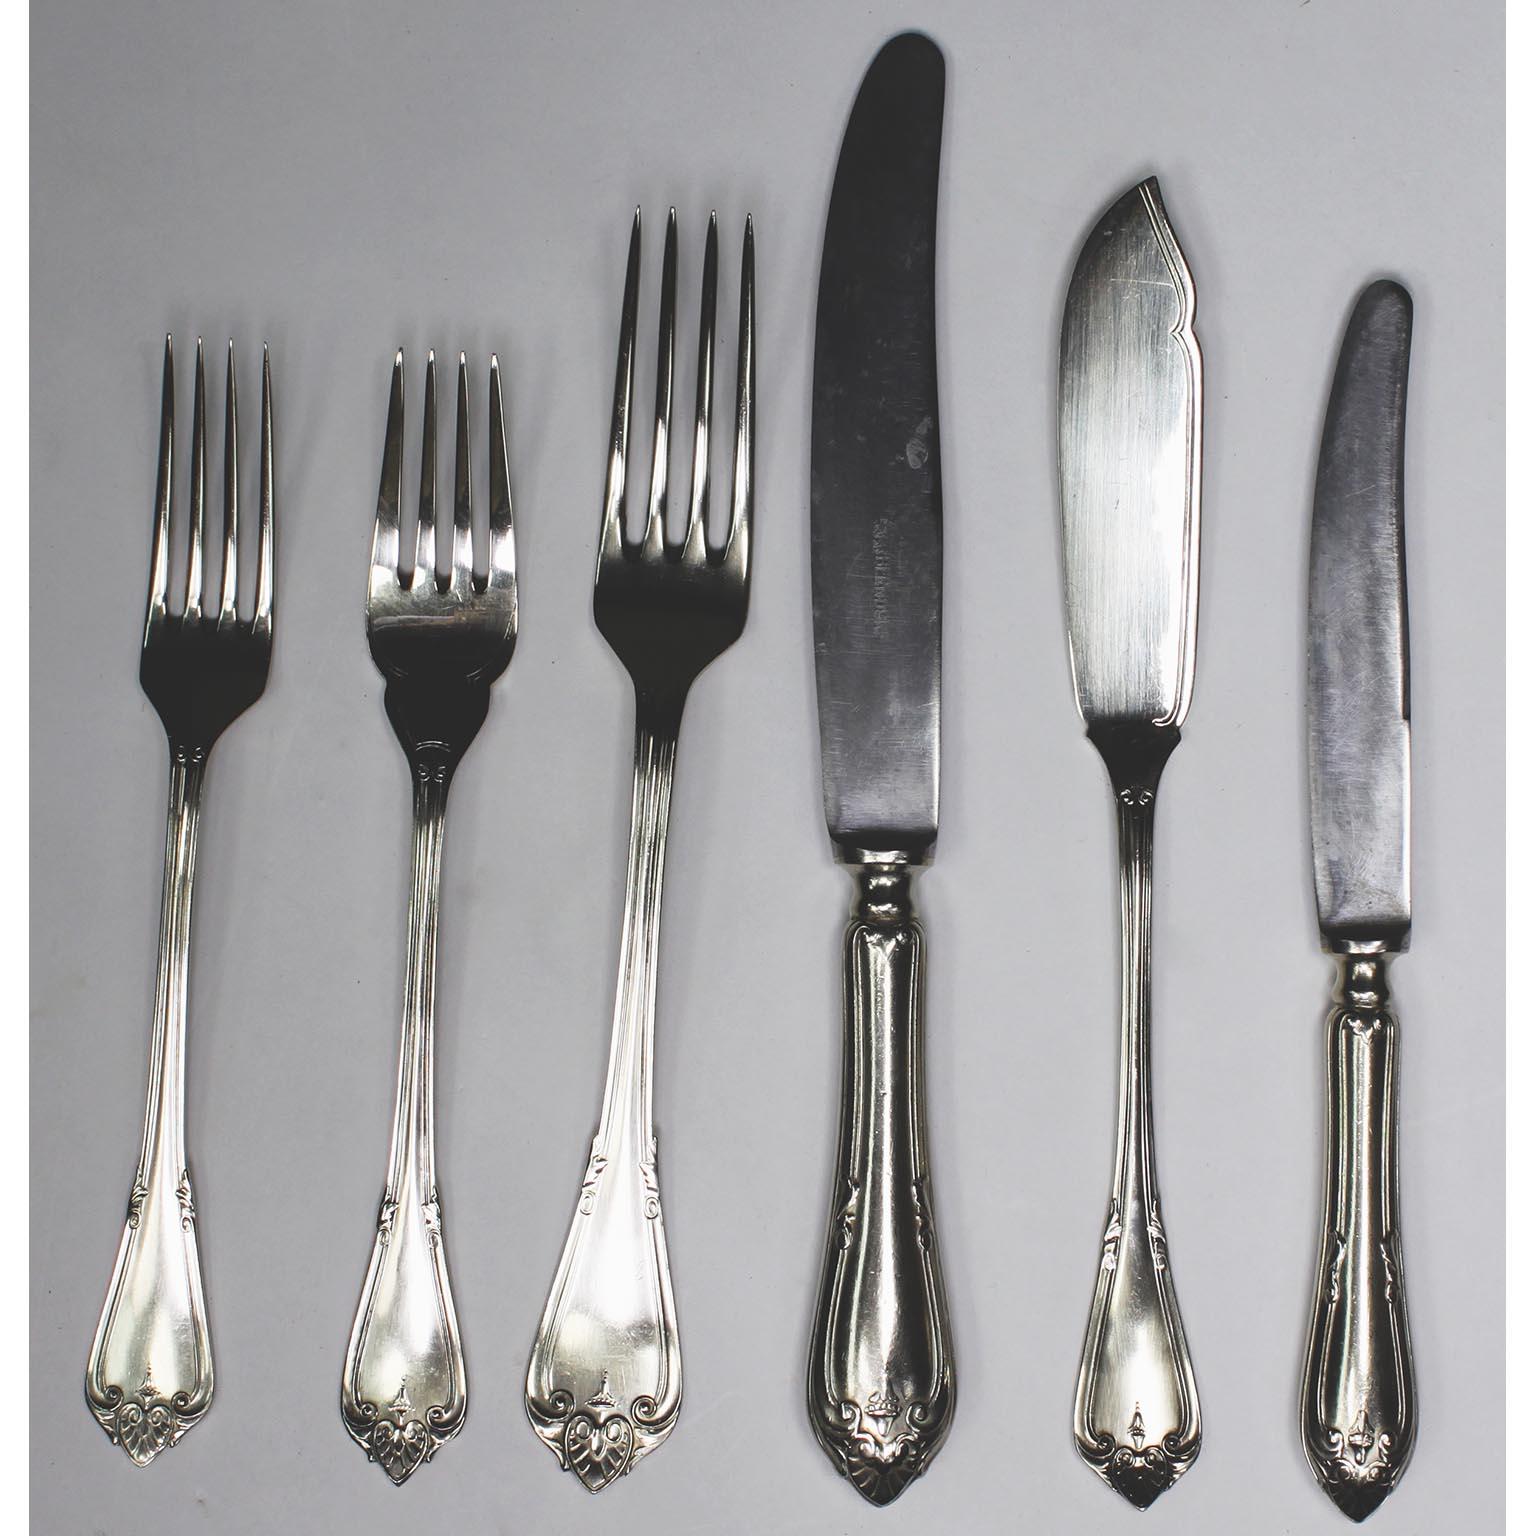 Neoclassical Revival A Fine Early 20th Century 152 Piece Austrian Flatware Set by Berndorf Alpacca For Sale